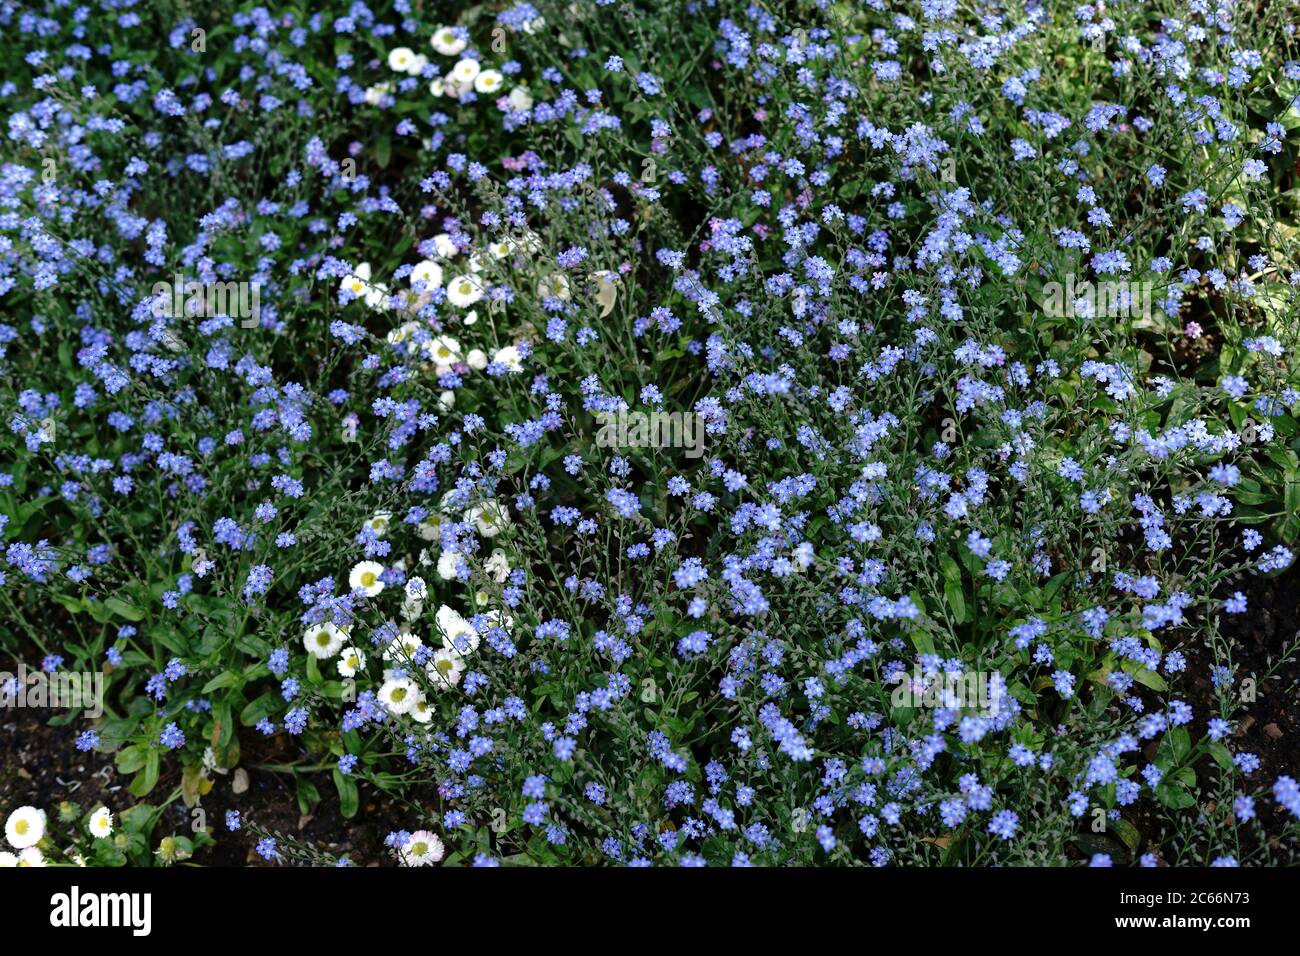 Top view of a sea of flowers of forget-me-not flowers and a few daisies in between, Stock Photo